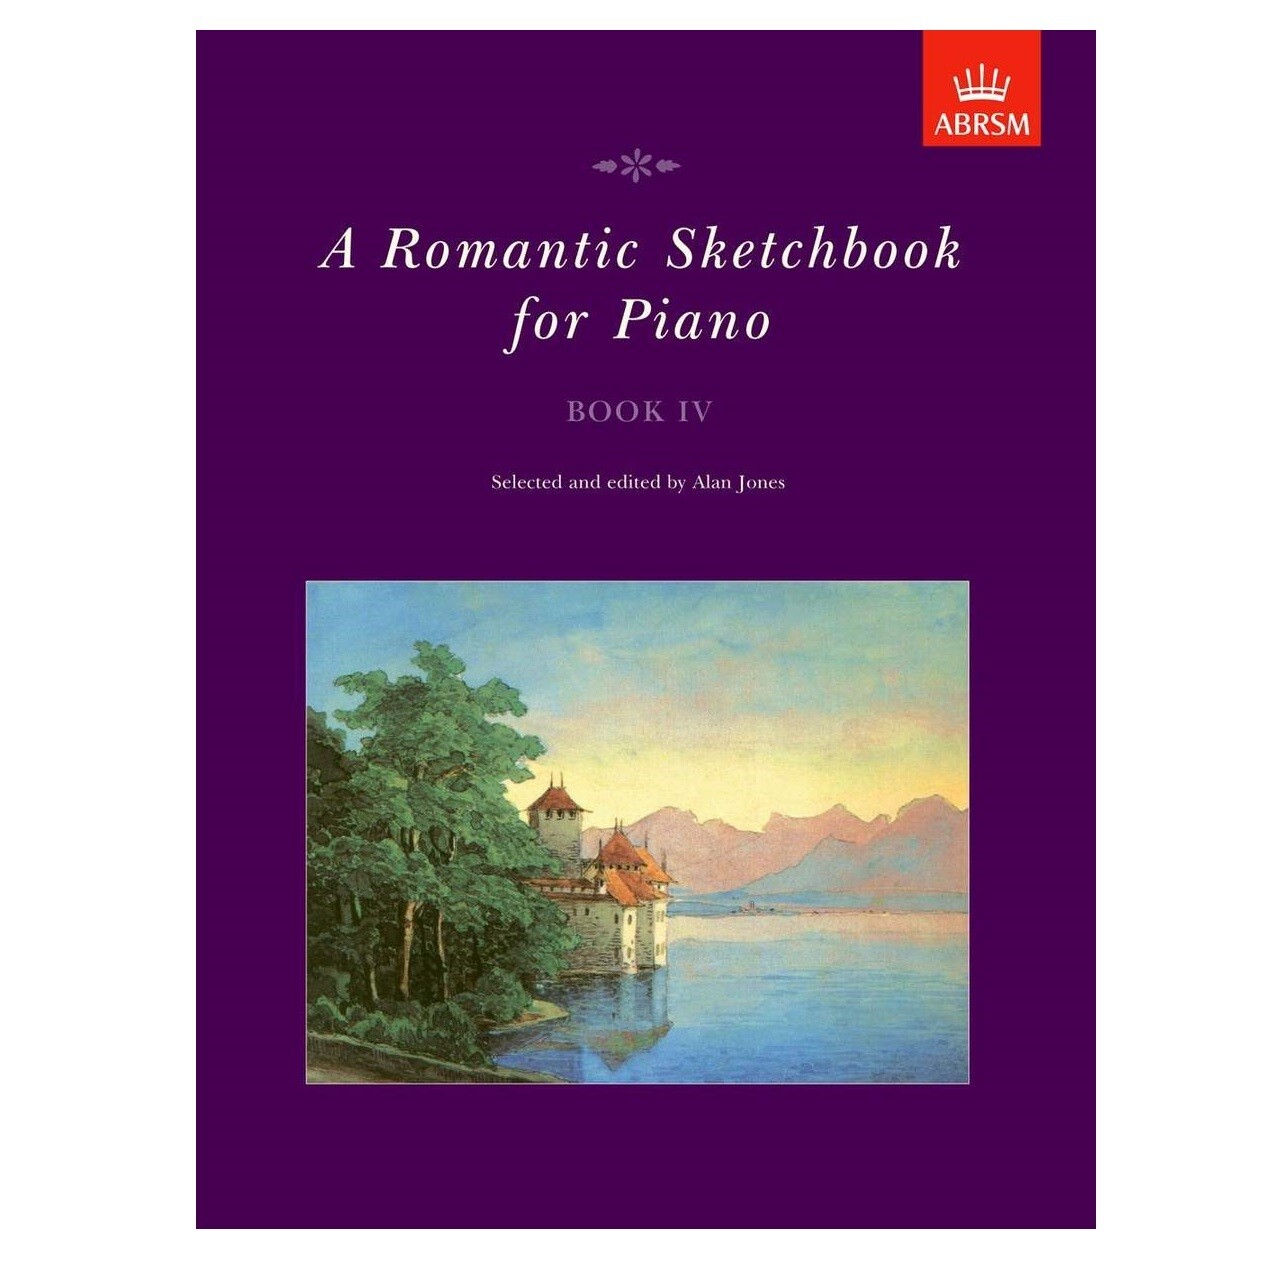 A Romantic Sketchbook for Piano, Book IV